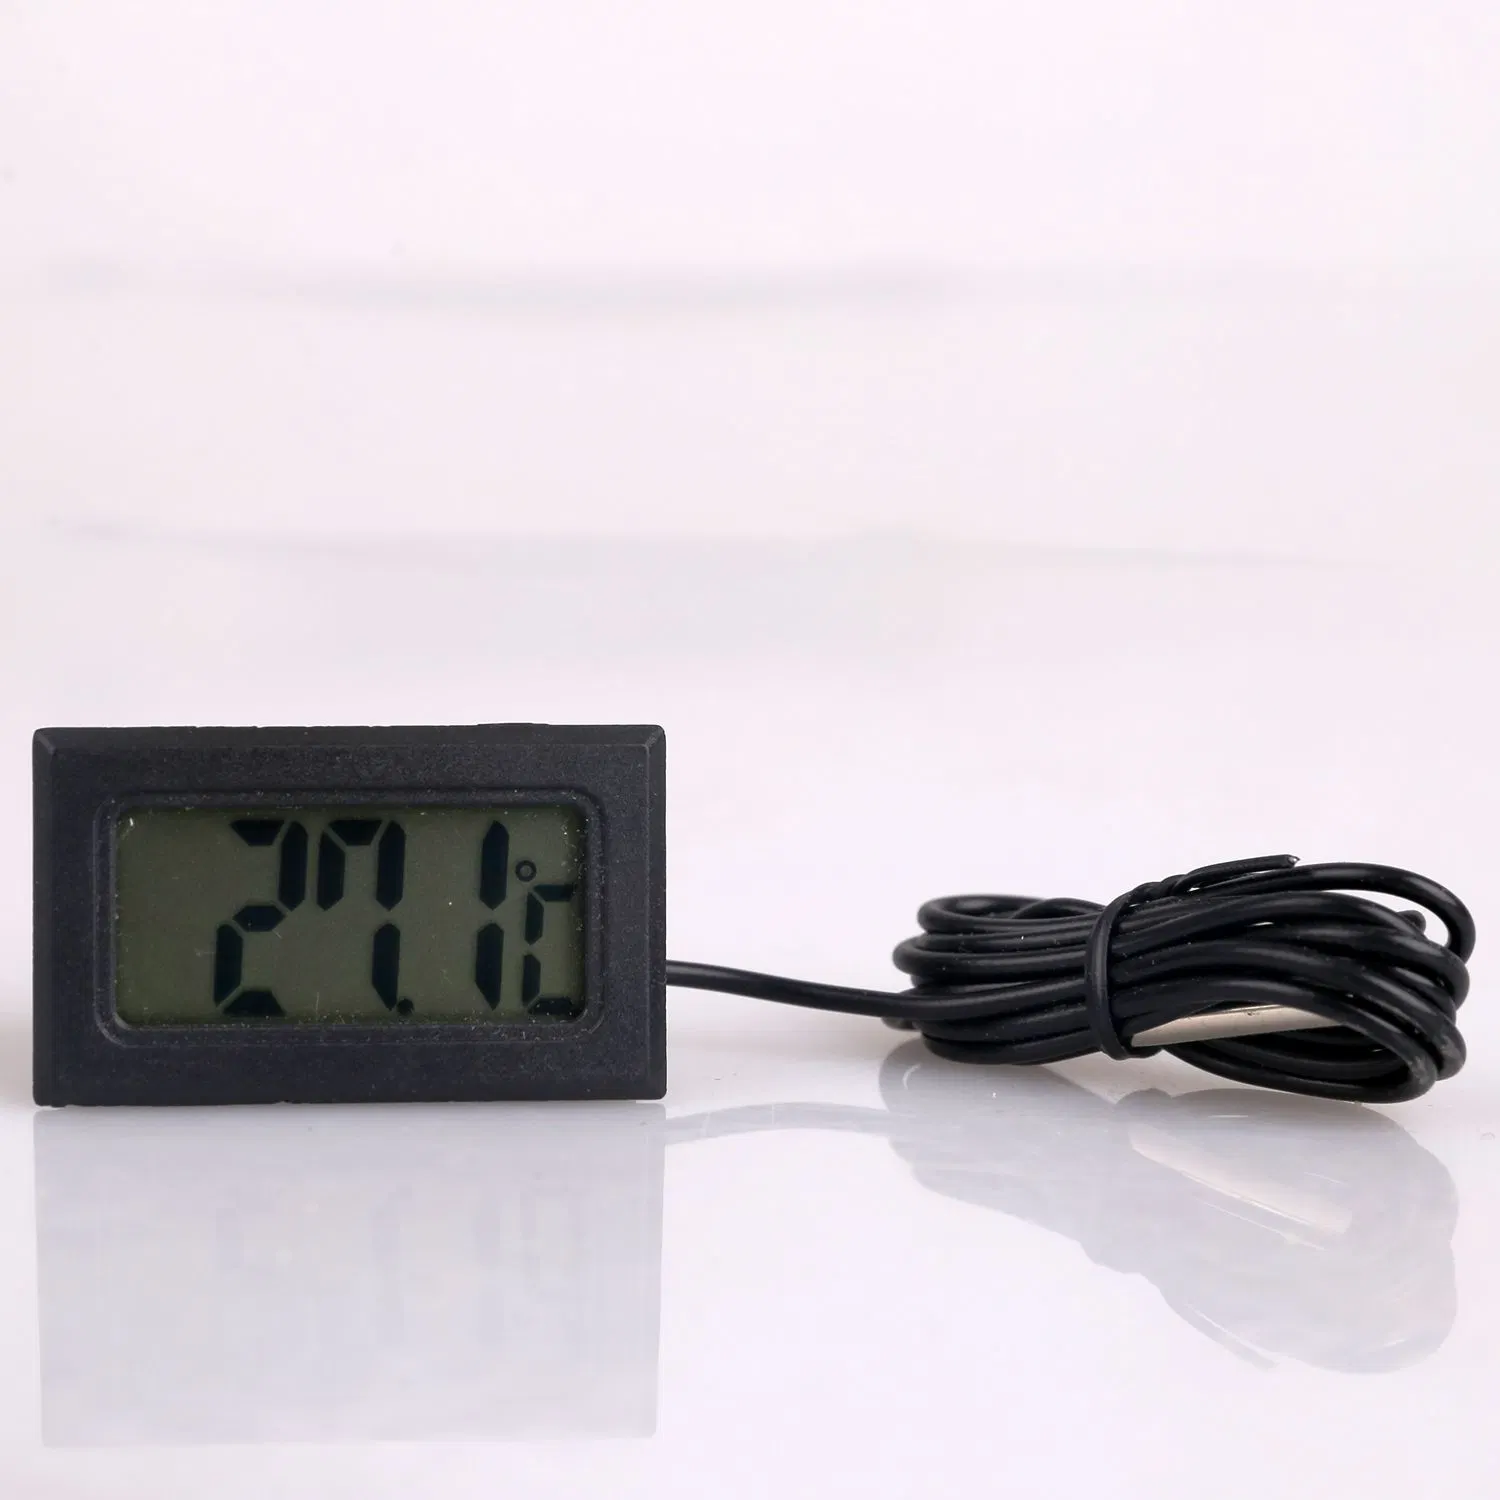 LCD Display Digital Thermometer for Refrigeration Tpm-10